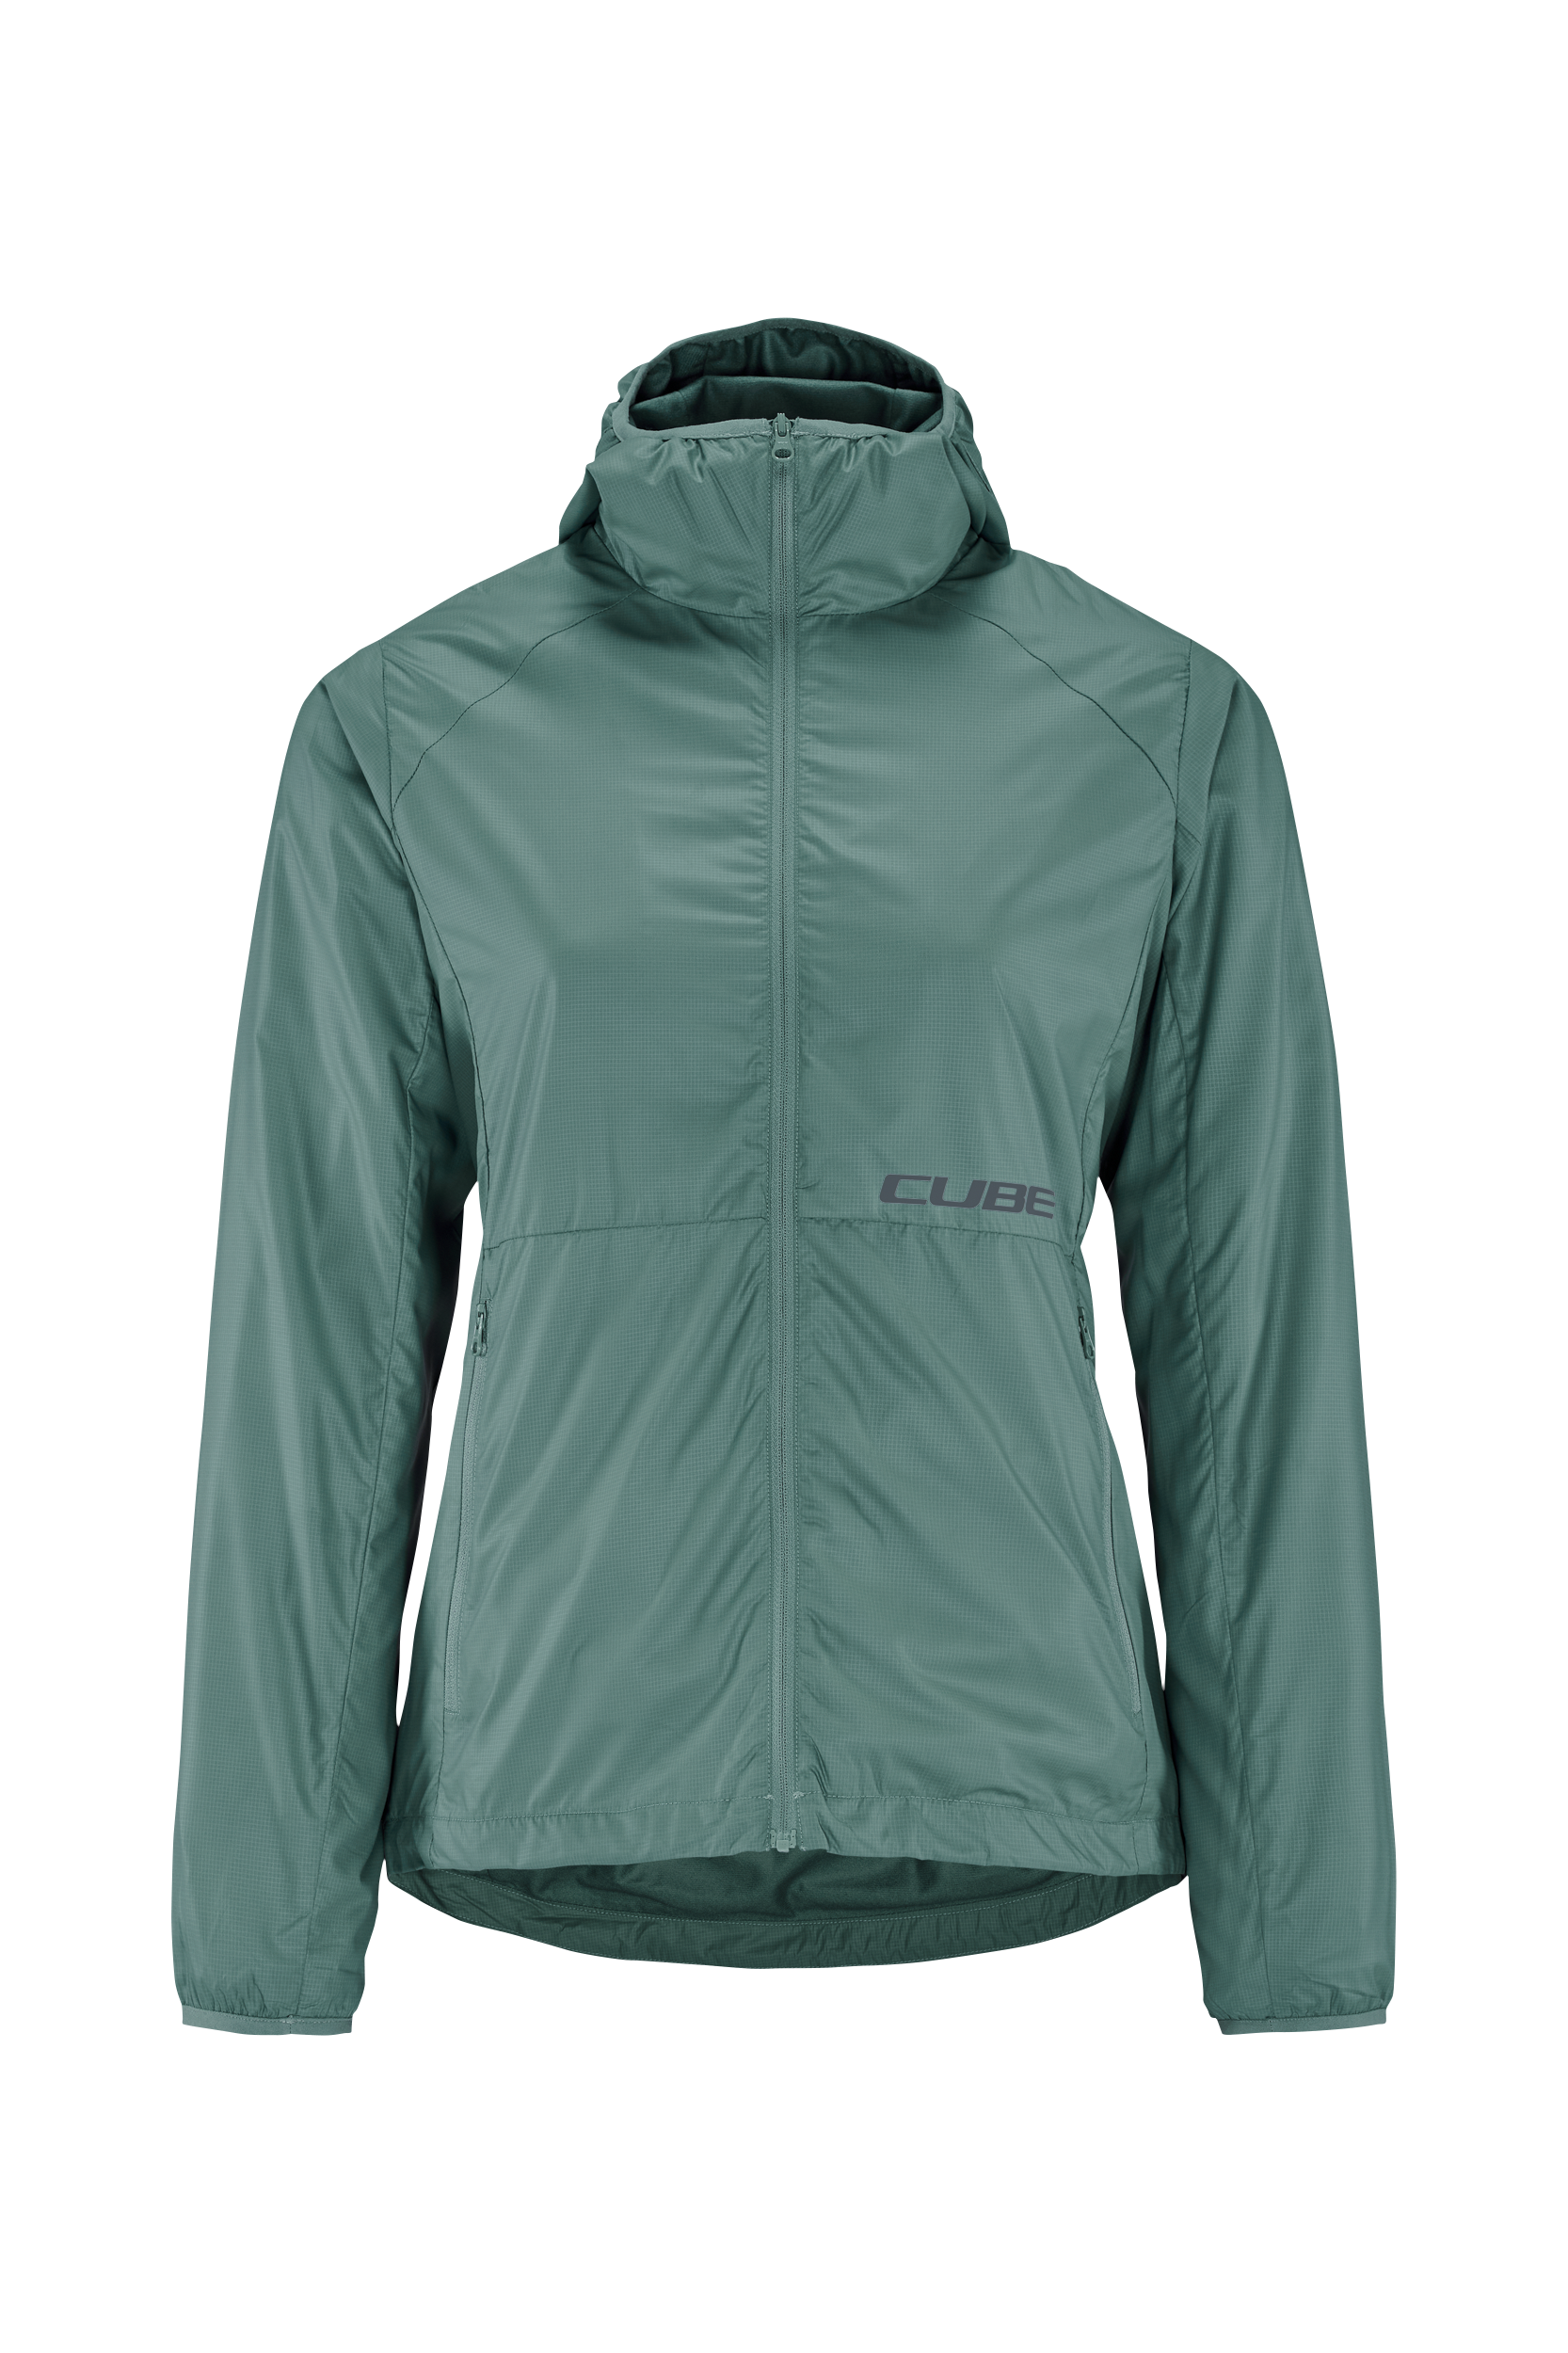 CUBE GRAVEL WS Jacket All-Weather